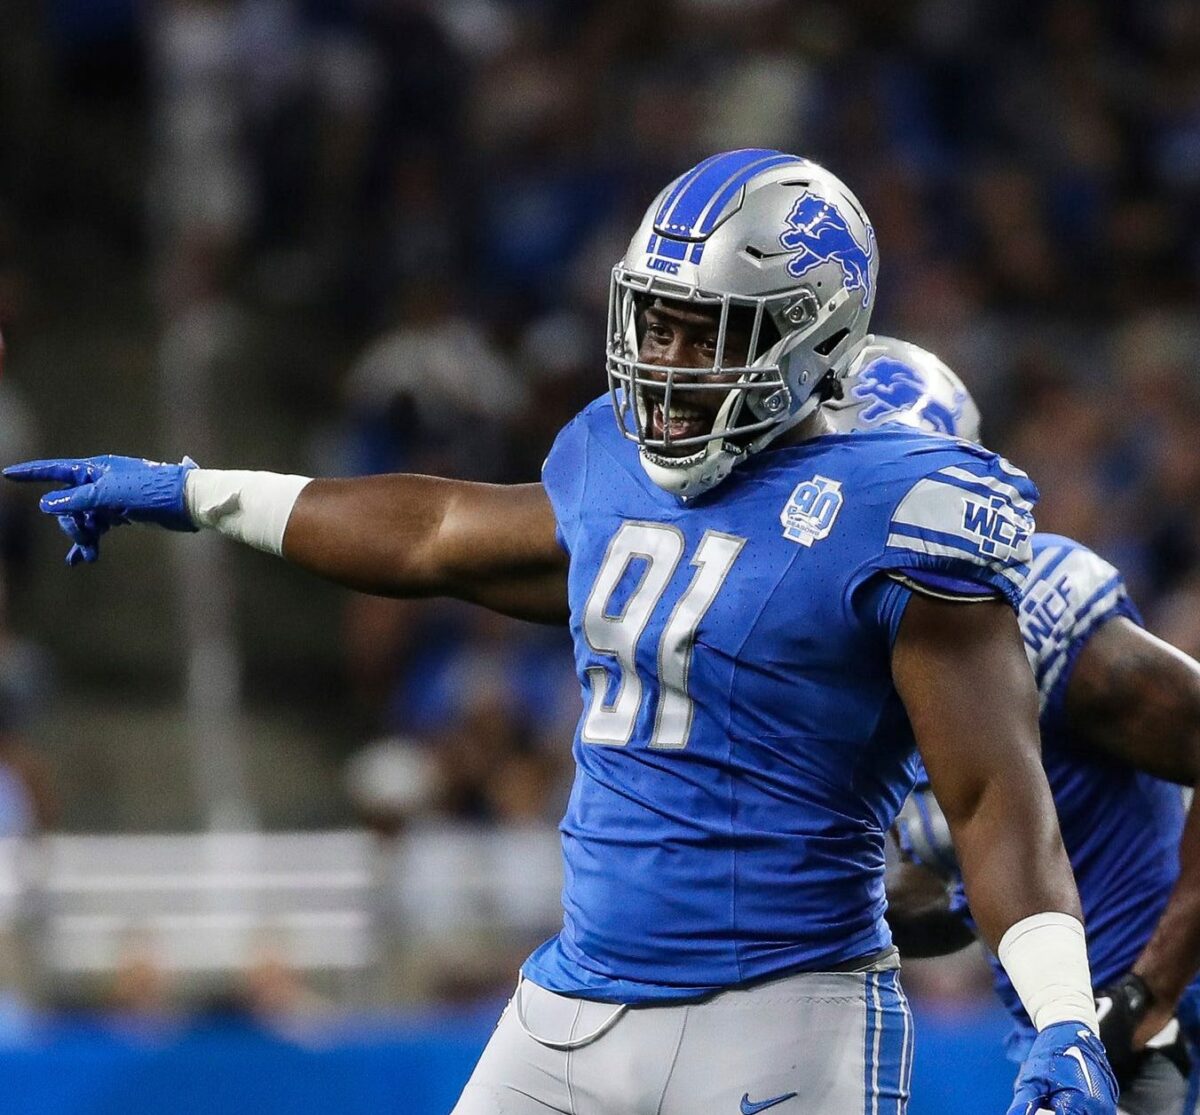 Lions vs. Jaguars: Detroit roster bubble players to watch in the preseason matchup